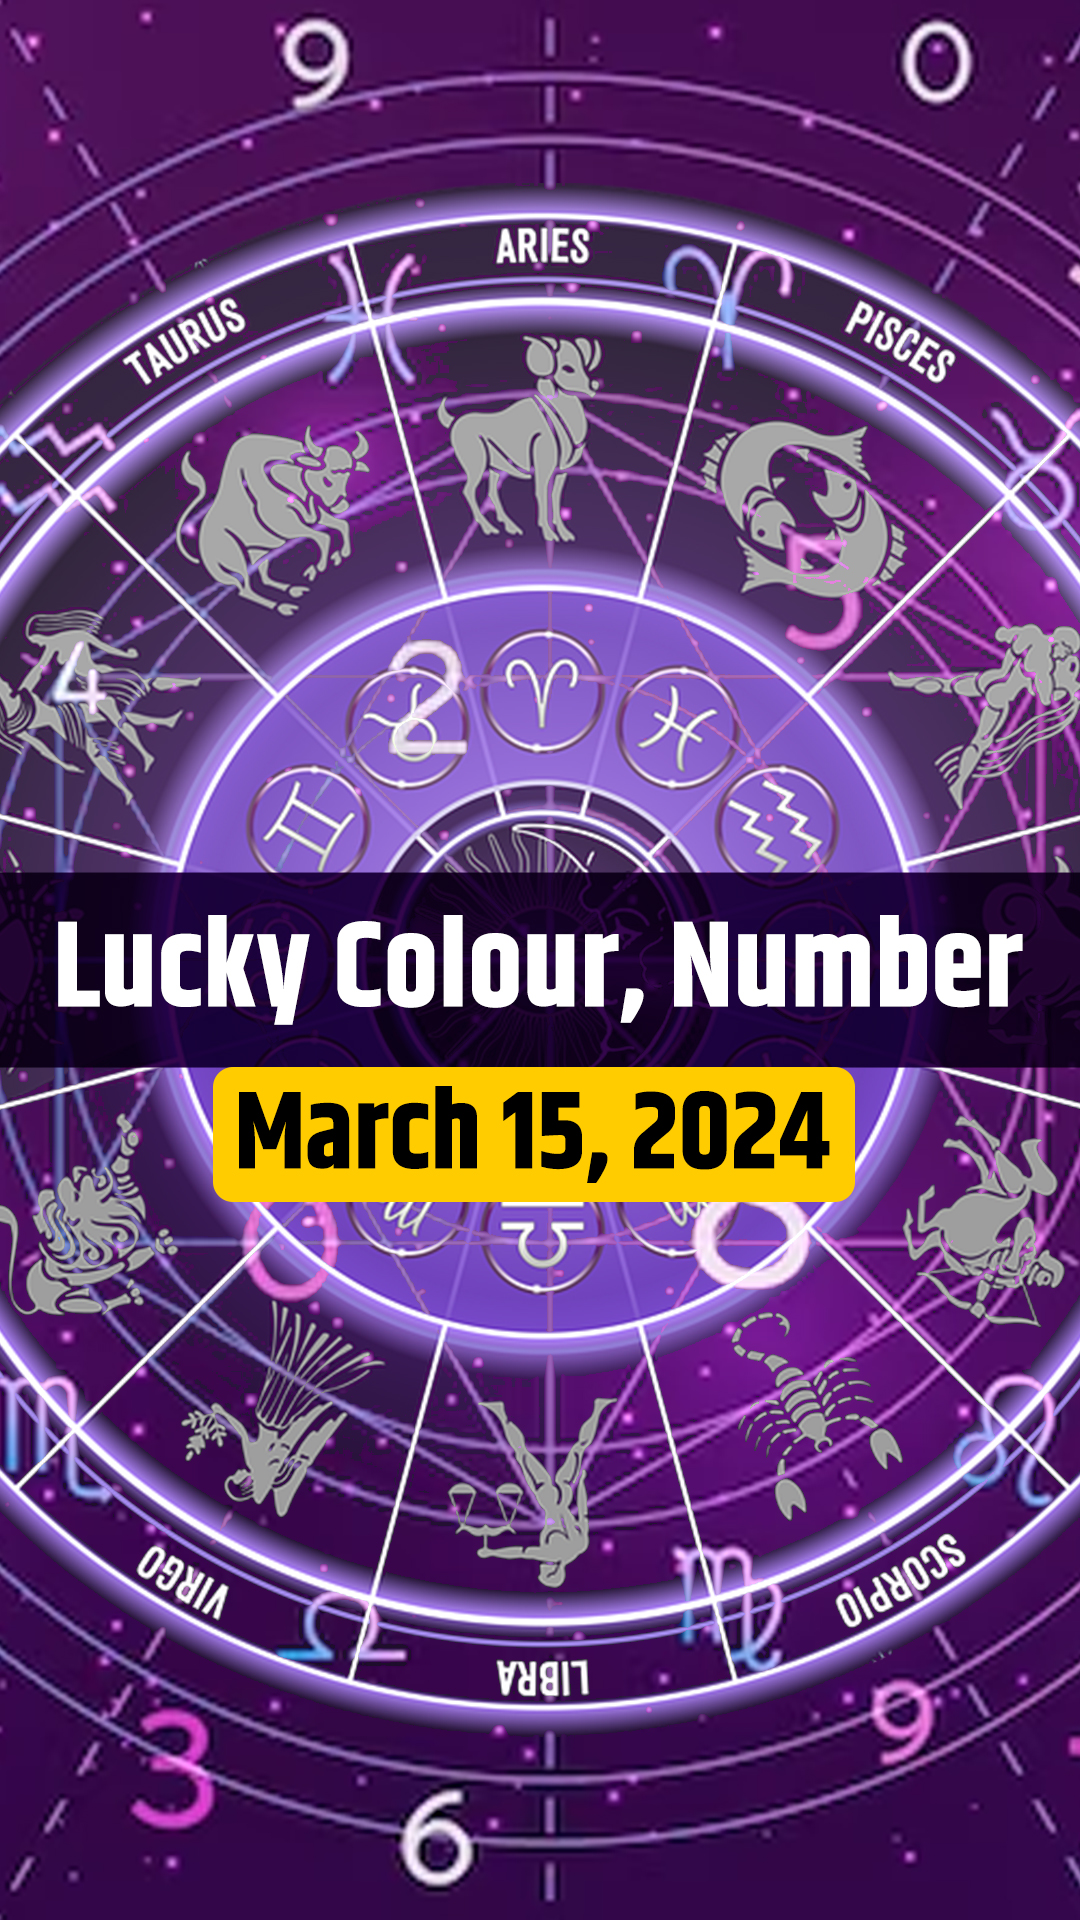 Know lucky colour, number of all zodiac signs in horoscope for March 15, 2024